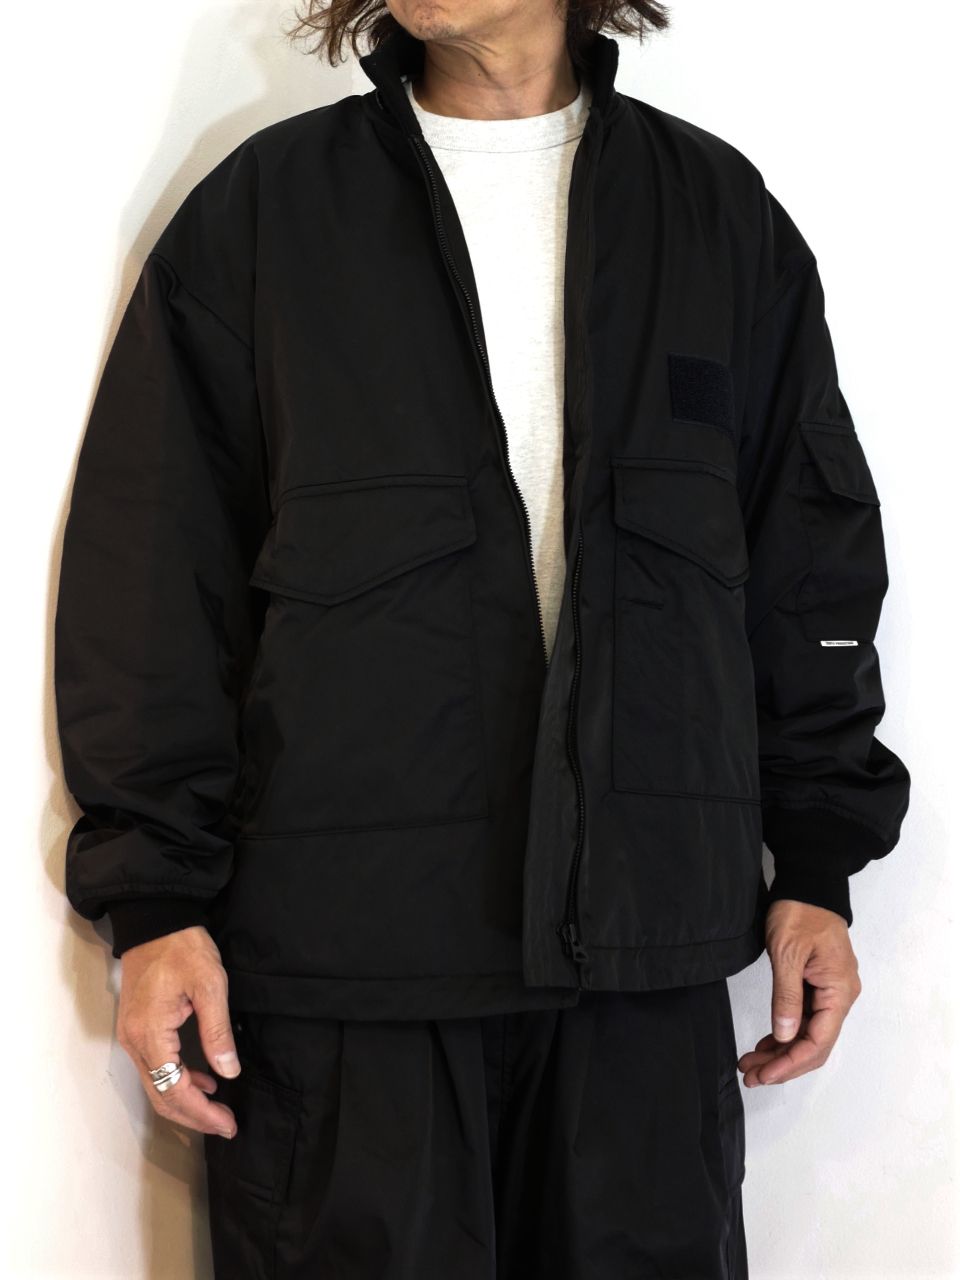 COOTIE PRODUCTIONS - Memory Polyester Twill WEP Jacket 